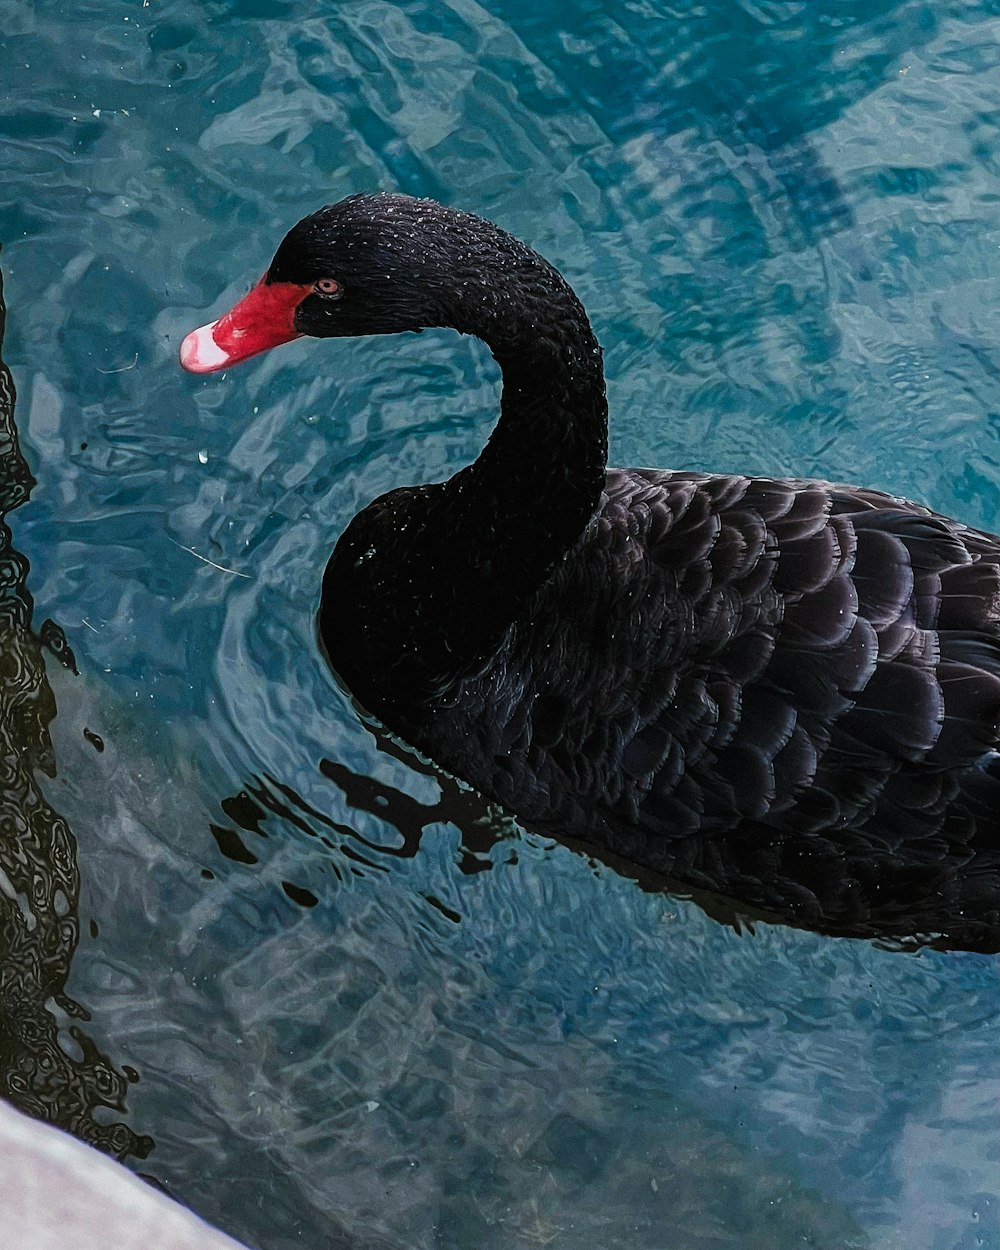 a black swan with a red beak swims in the water